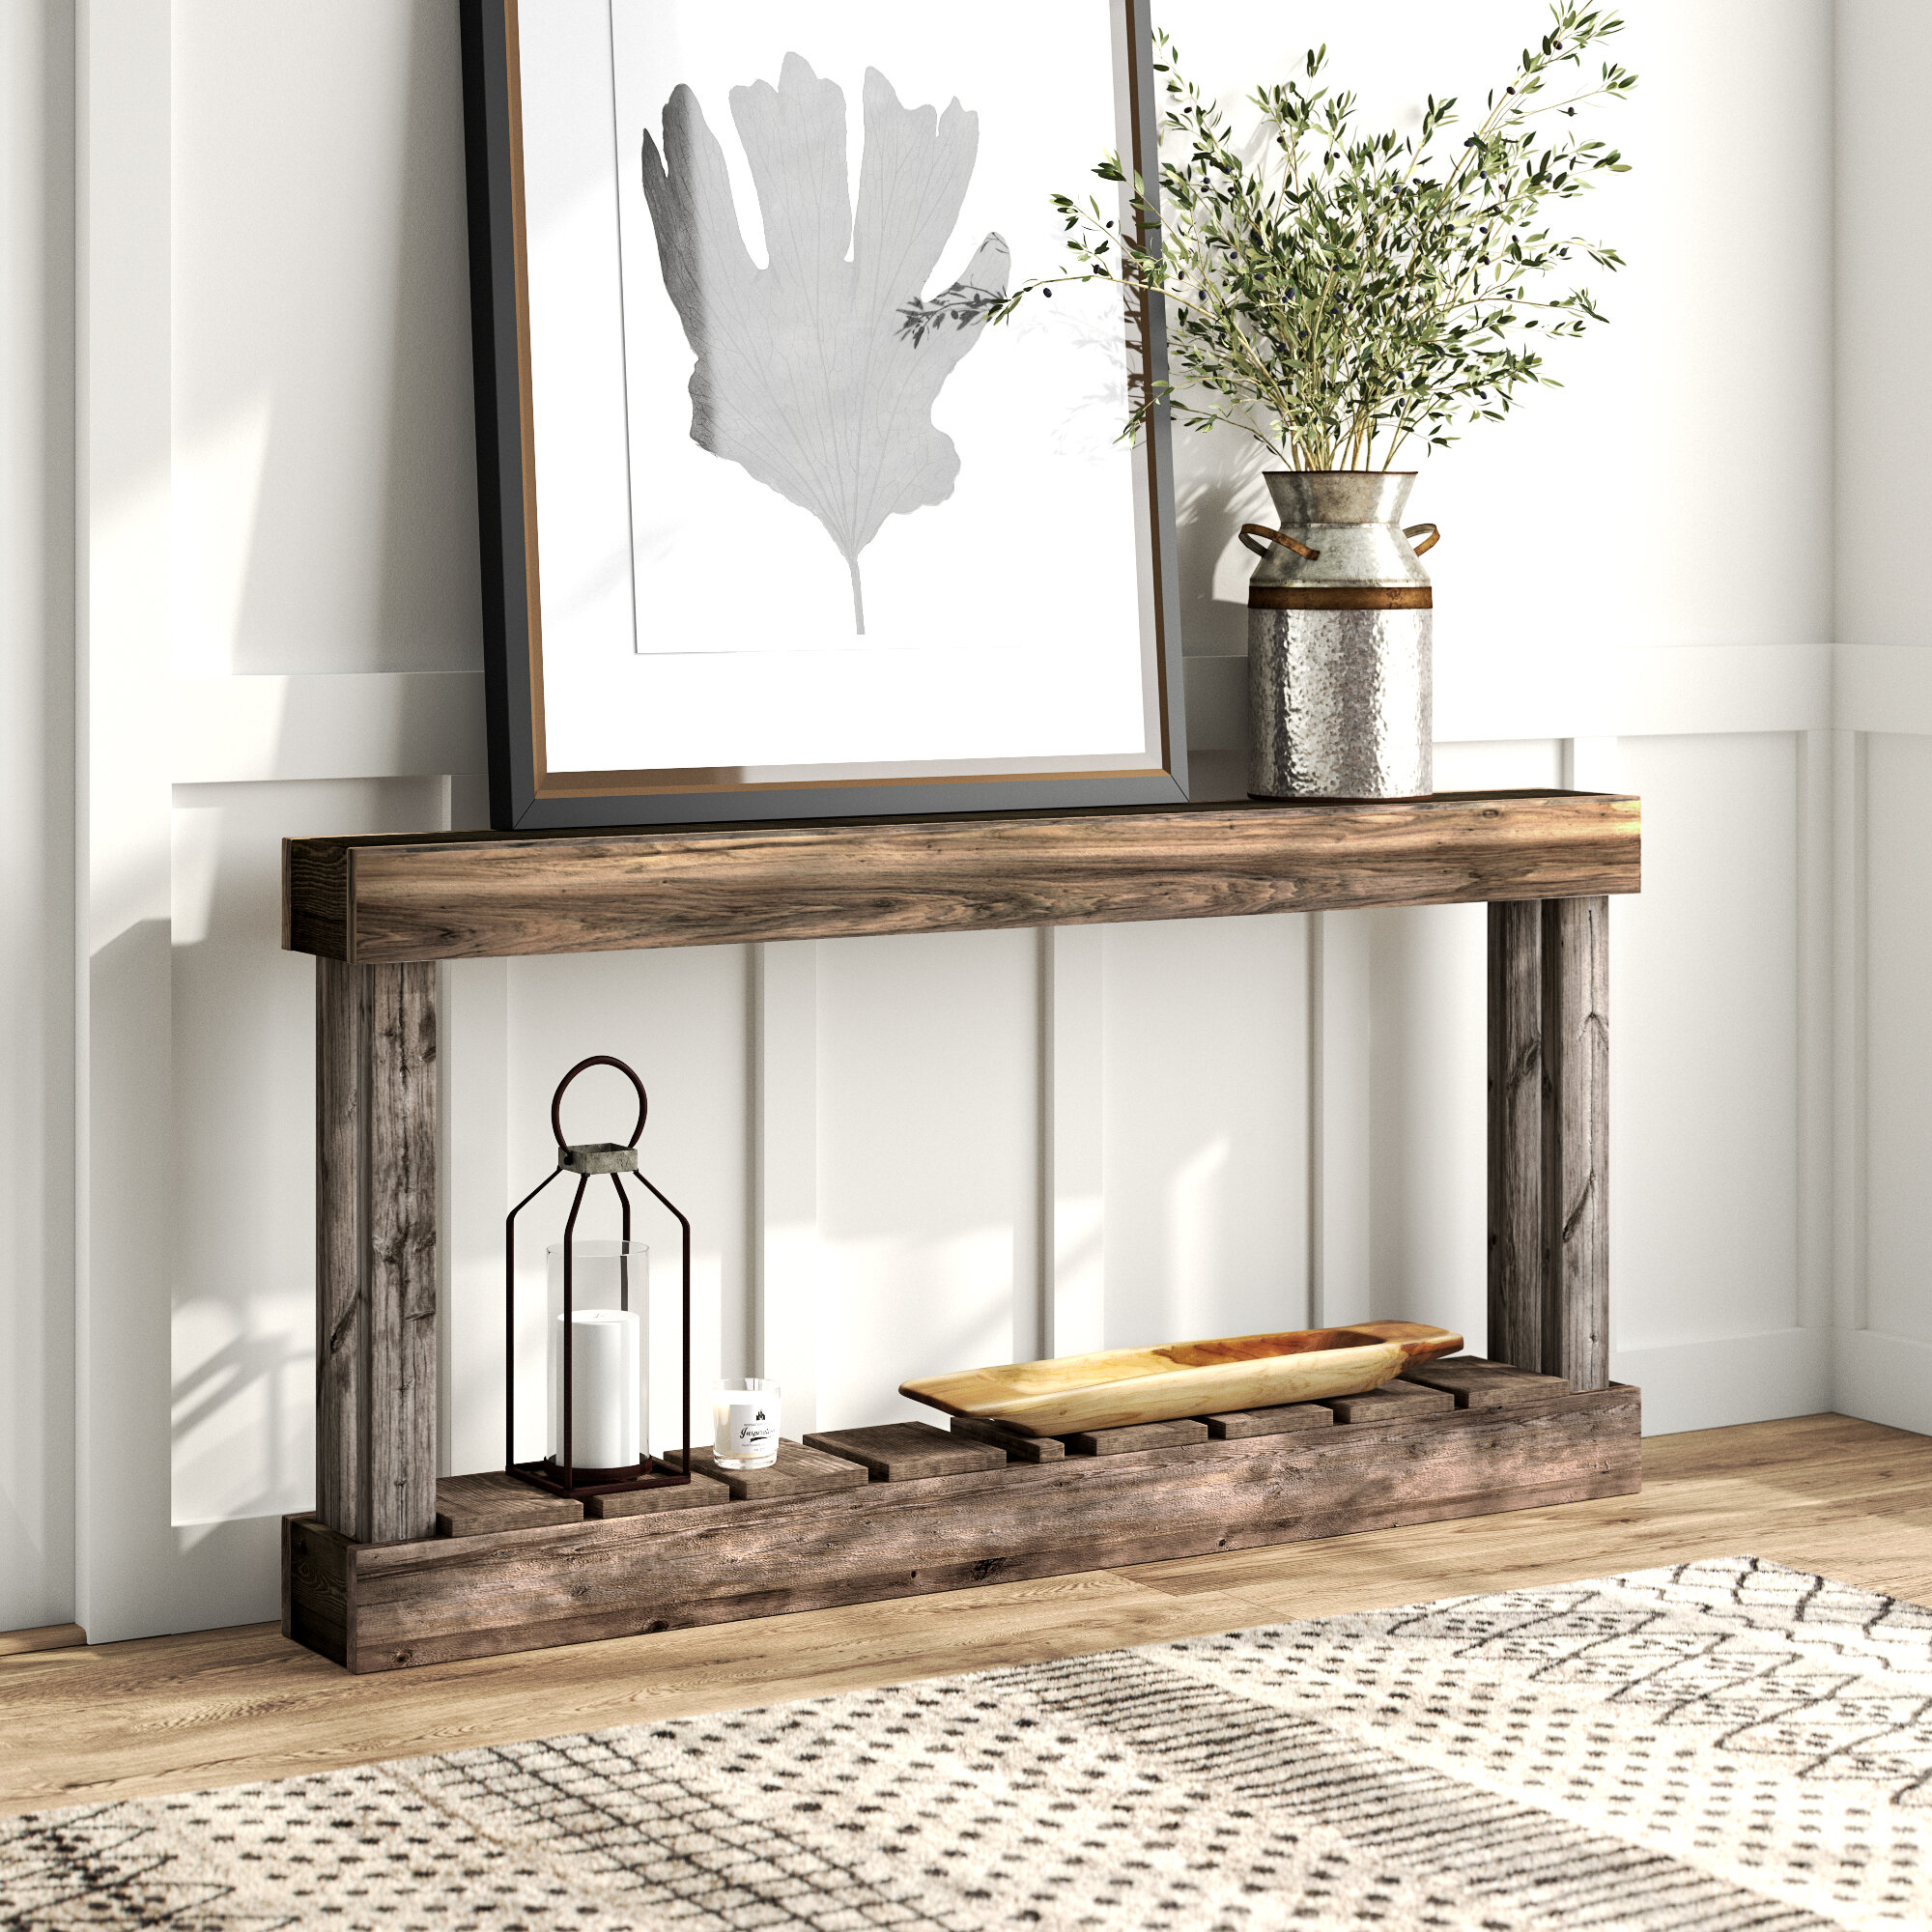 Sofa Console Narrow Table, Reclaimed Wood Table With Natural Live